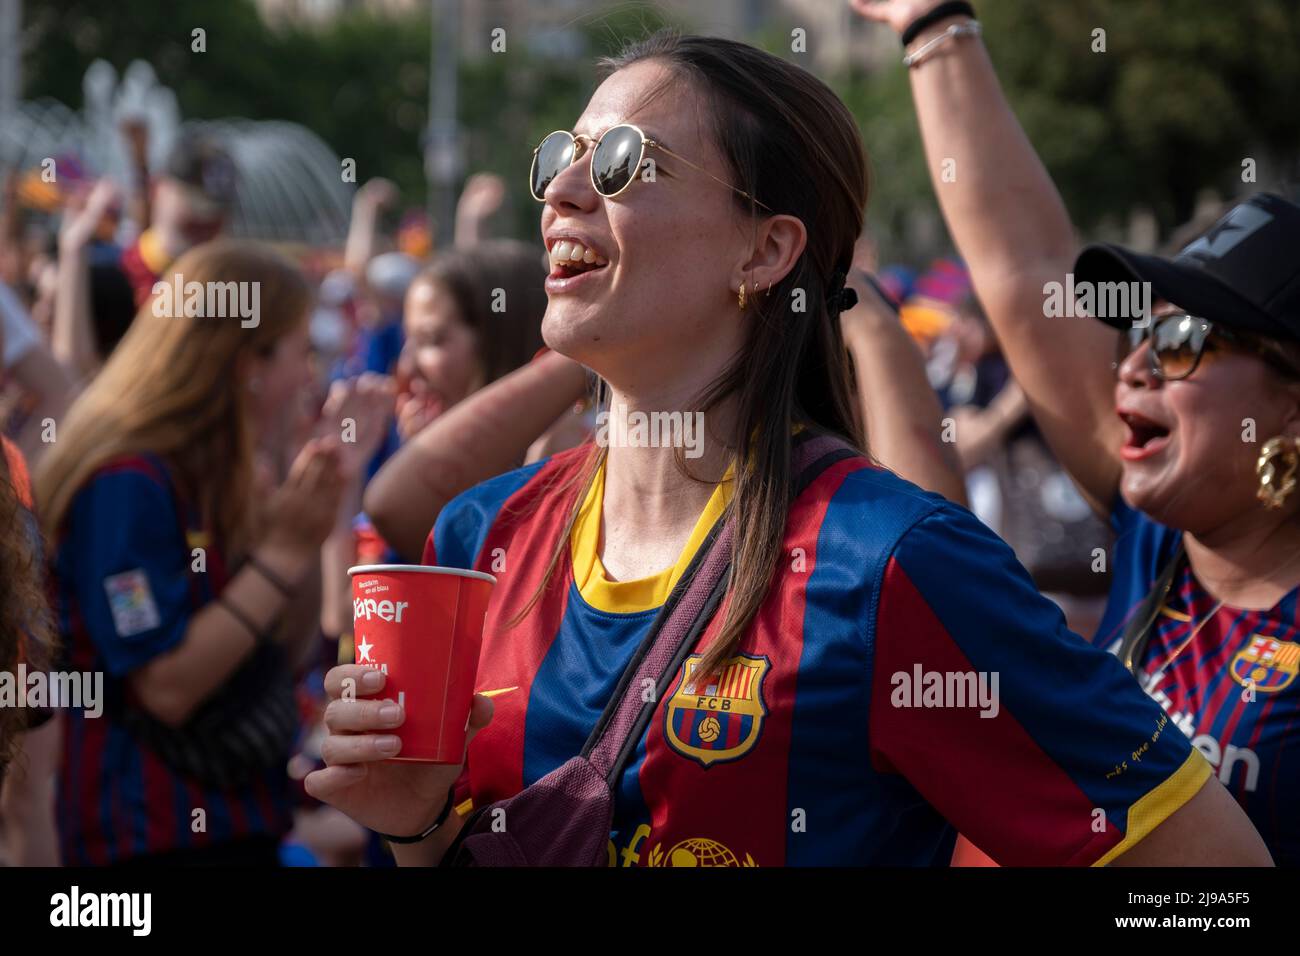 Barcelona, Spain. 21st May, 2022. A female Barcelona Football Club supporter wearing the club's shirt is seen chanting slogans before the start of the match. Followers of the Barcelona Women's Soccer Club gathered at Plaza Catalunya to follow on a giant screen the final of the women's Champions League between Olympique of Lyon Women and FC Barcelona Women. Final score Olympique of Lyon Women 3-1 FC Barcelona Women. Credit: SOPA Images Limited/Alamy Live News Stock Photo